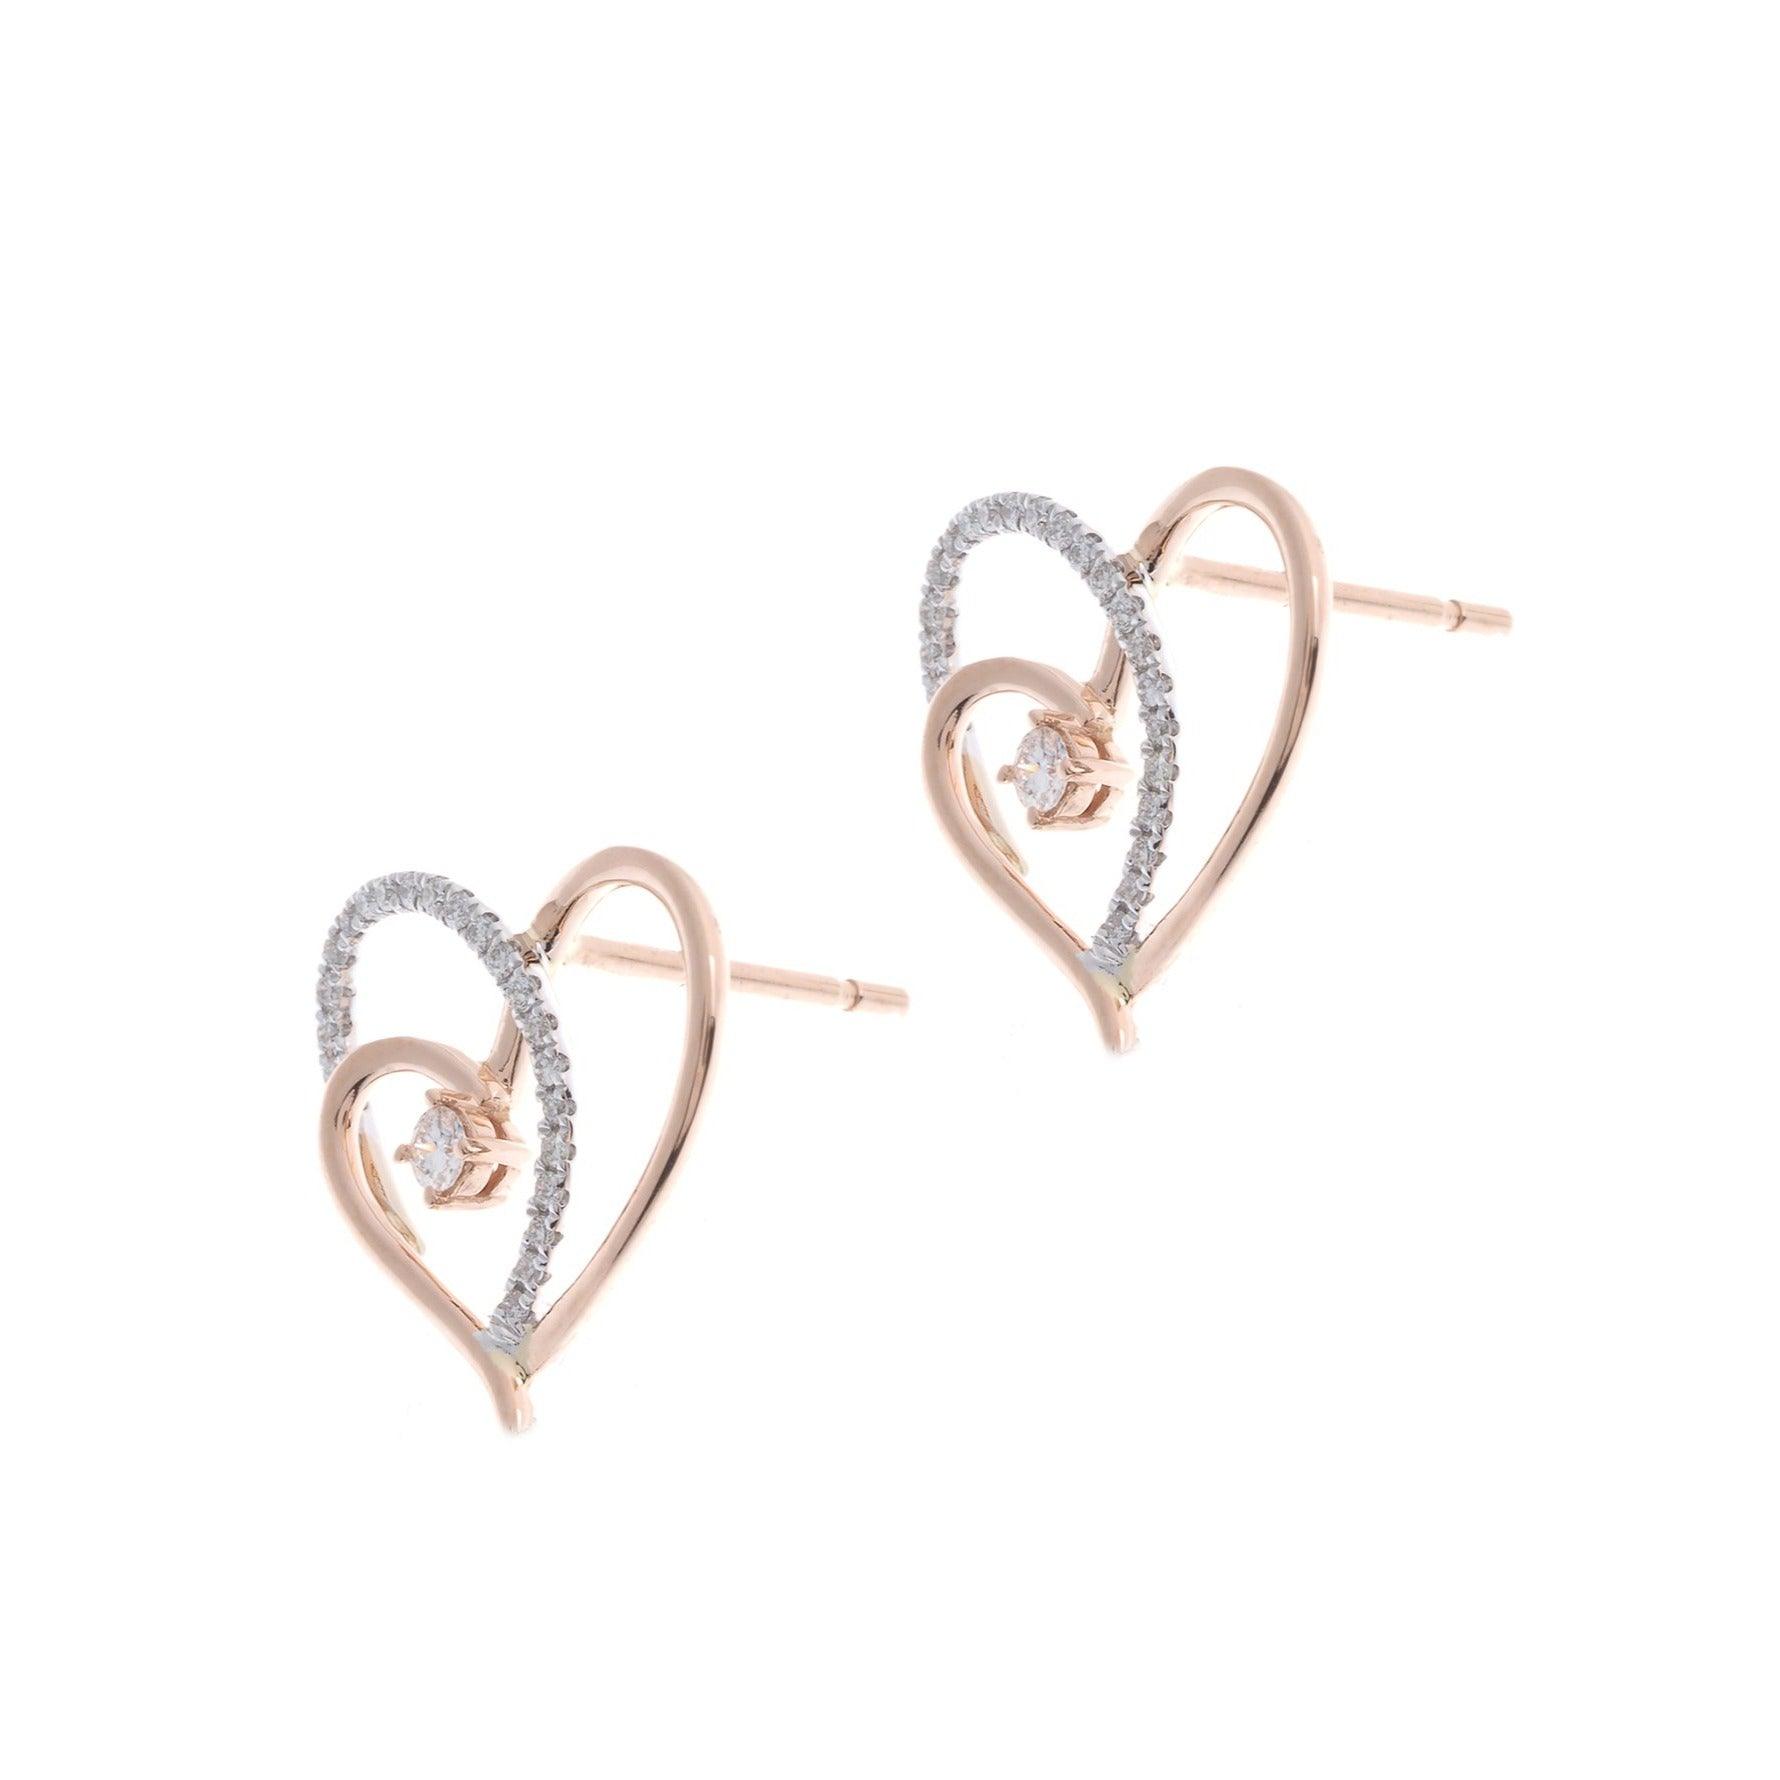 18ct Rose and White Gold Diamond Heart Design Earrings with push backs E43265-1 - Minar Jewellers